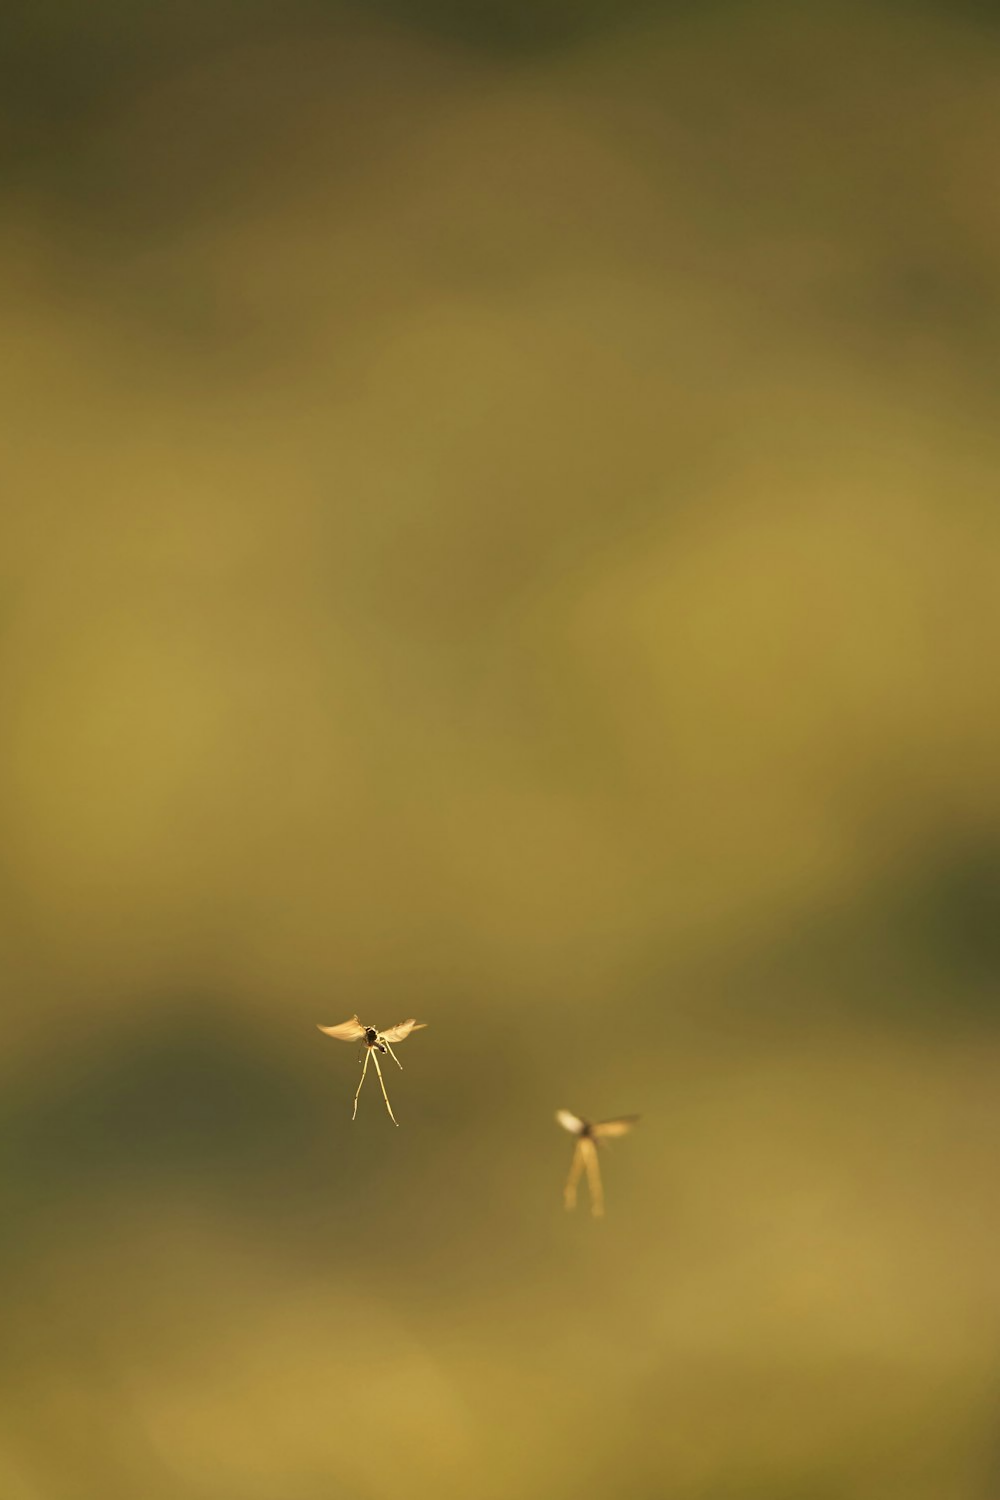 An image of two mosquitos 